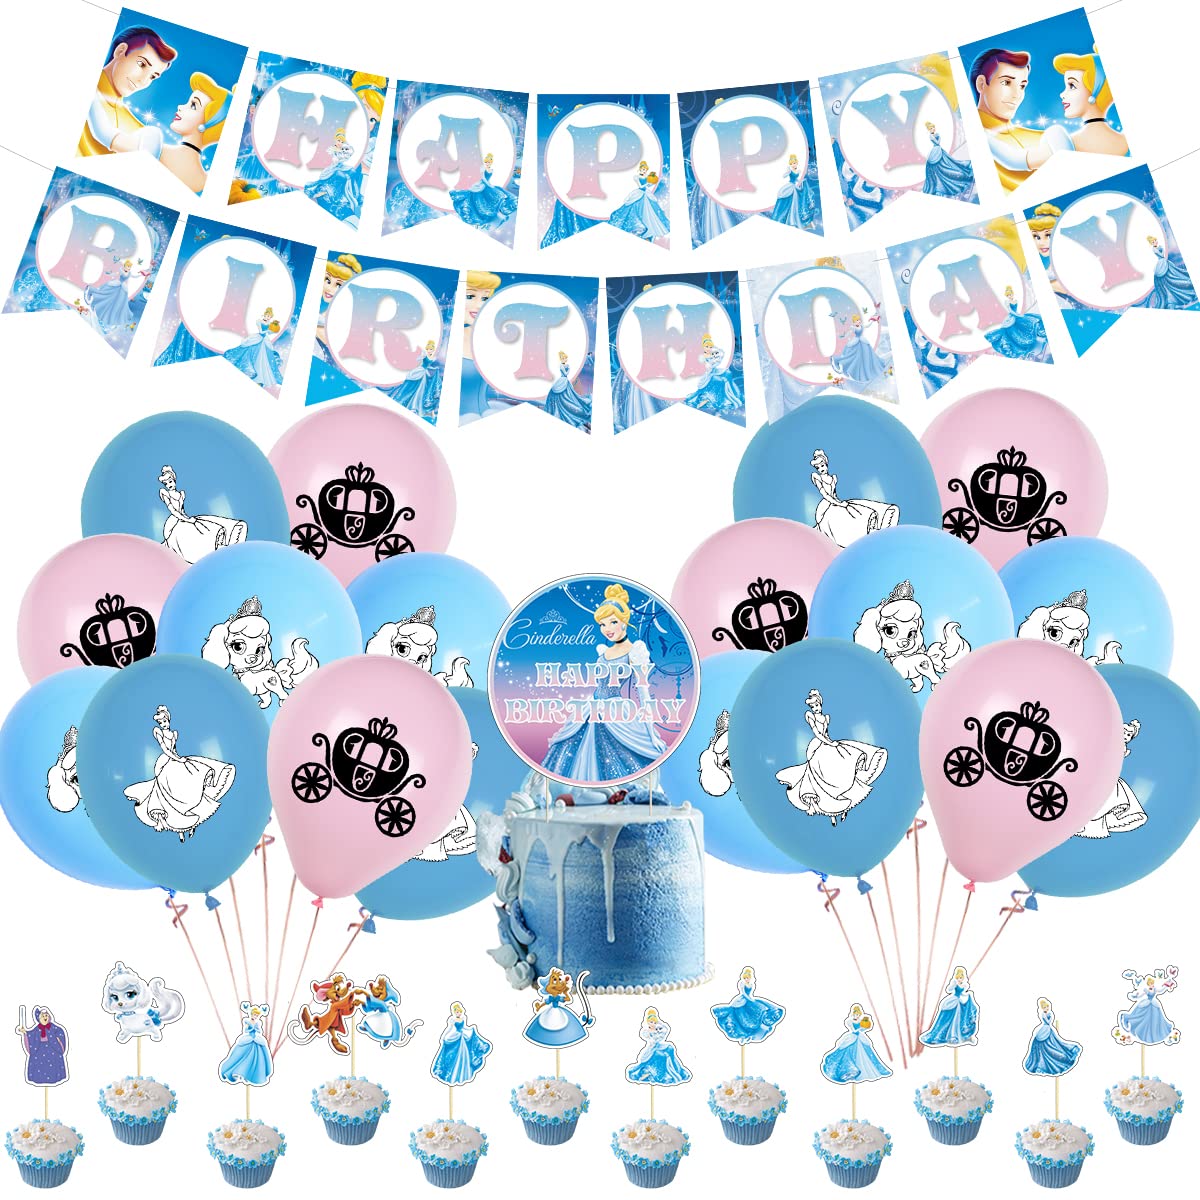 33 Pcs Cinderella Party Supplies,1 Cinderella Backdrop,1 Cake Topper, 12 Cupcake Toppers, 1 Happy Birthday Banner, 18 Balloons for Girls & Boys (5x3FT)